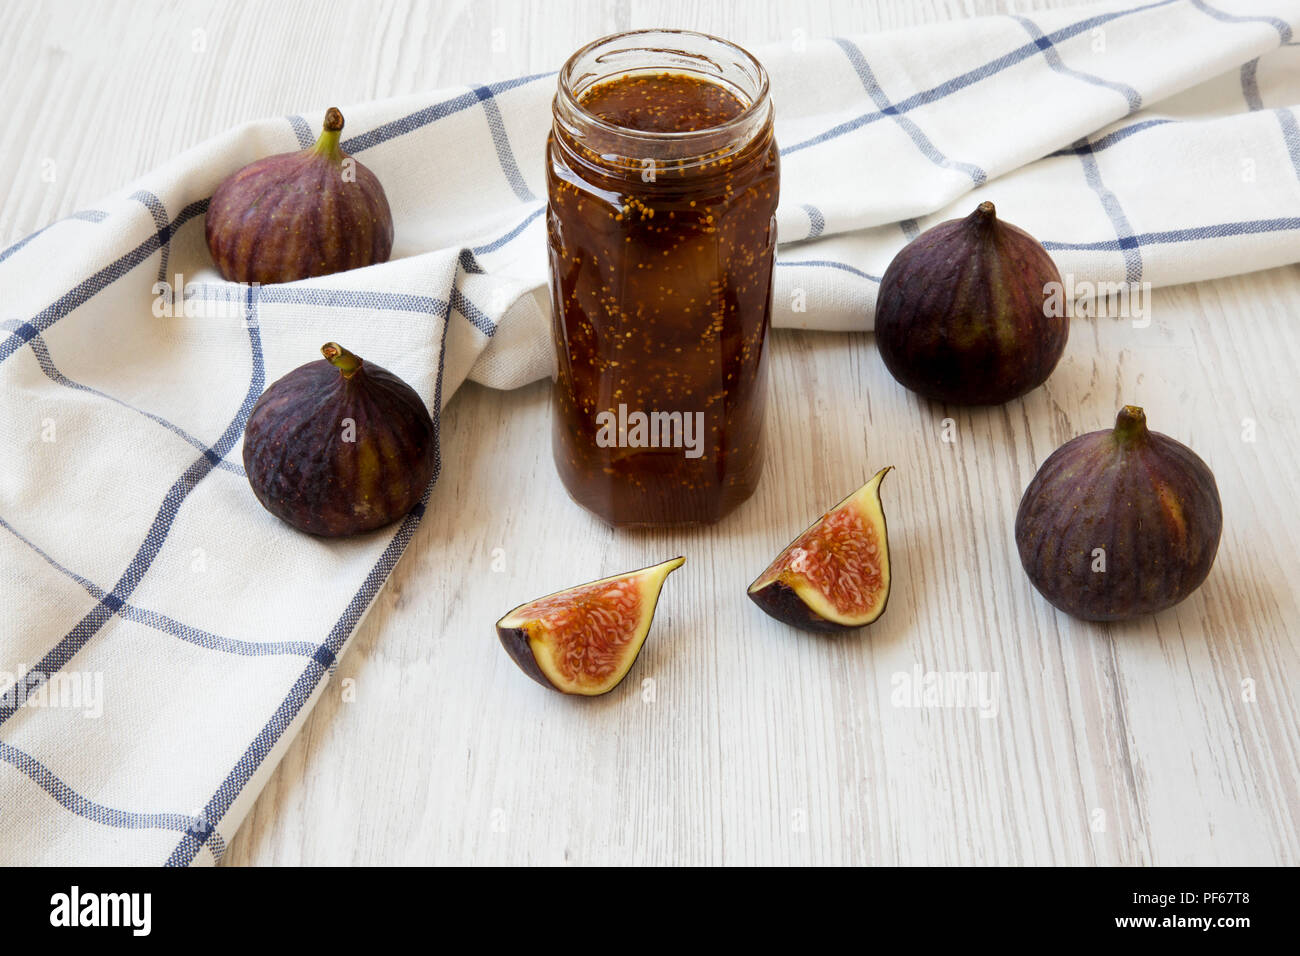 Glass jar of fig jam and fresh figs on white wooden table, side view. Close-up. Stock Photo